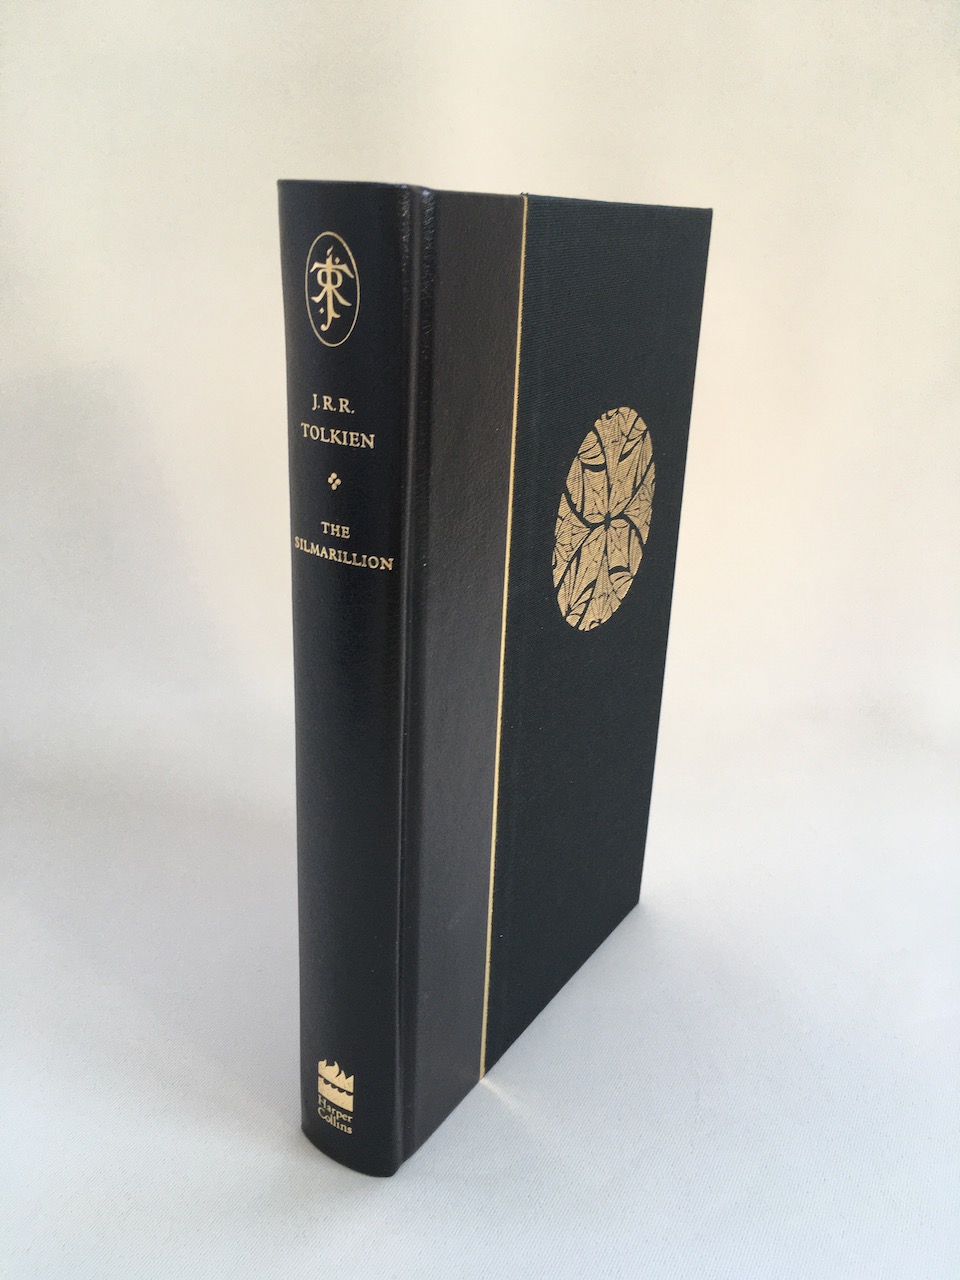 
Black Limited De Luxe edition of the Silmarillion 2002 9